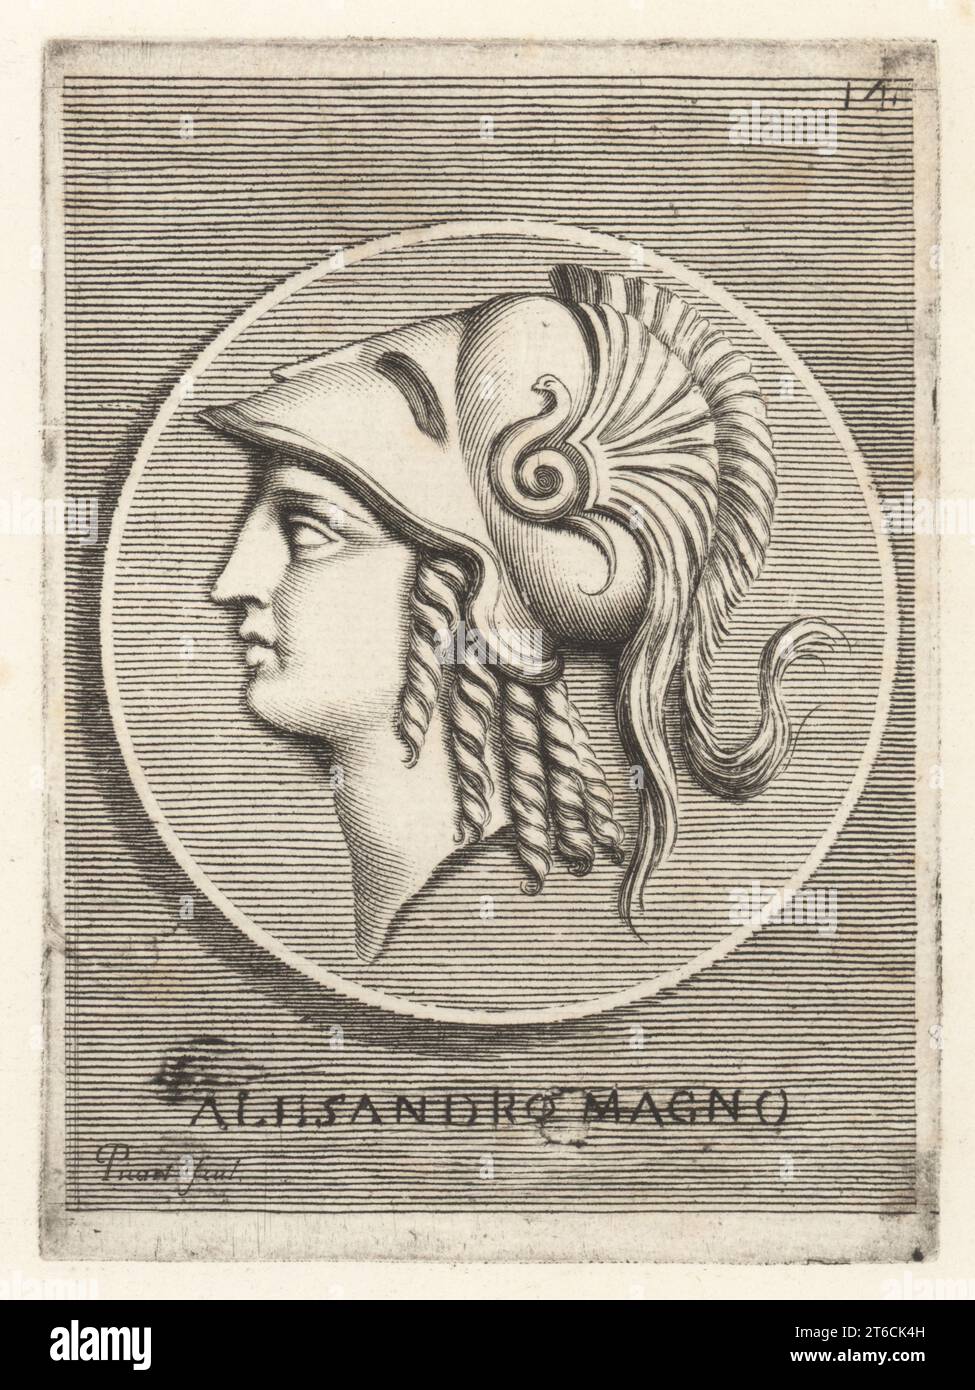 Profile portrait of Alexander the Great, Alexander III of Macedon, 356 323 BC, king of the ancient Greek kingdom of Macedon. Wearing a Corinthian helmet decorated with three feathers and a serpent. From a gold coin in the collection of Cardinal Camillo Massimo. Alessandro Magno. Copperplate engraving by Etienne Picart after Giovanni Angelo Canini from Iconografia, cioe disegni d'imagini de famosissimi monarchi, regi, filososi, poeti ed oratori dell' Antichita, Drawings of images of famous monarchs, kings, philosophers, poets and orators of Antiquity, Ignatio deLazari, Rome, 1699. Stock Photo